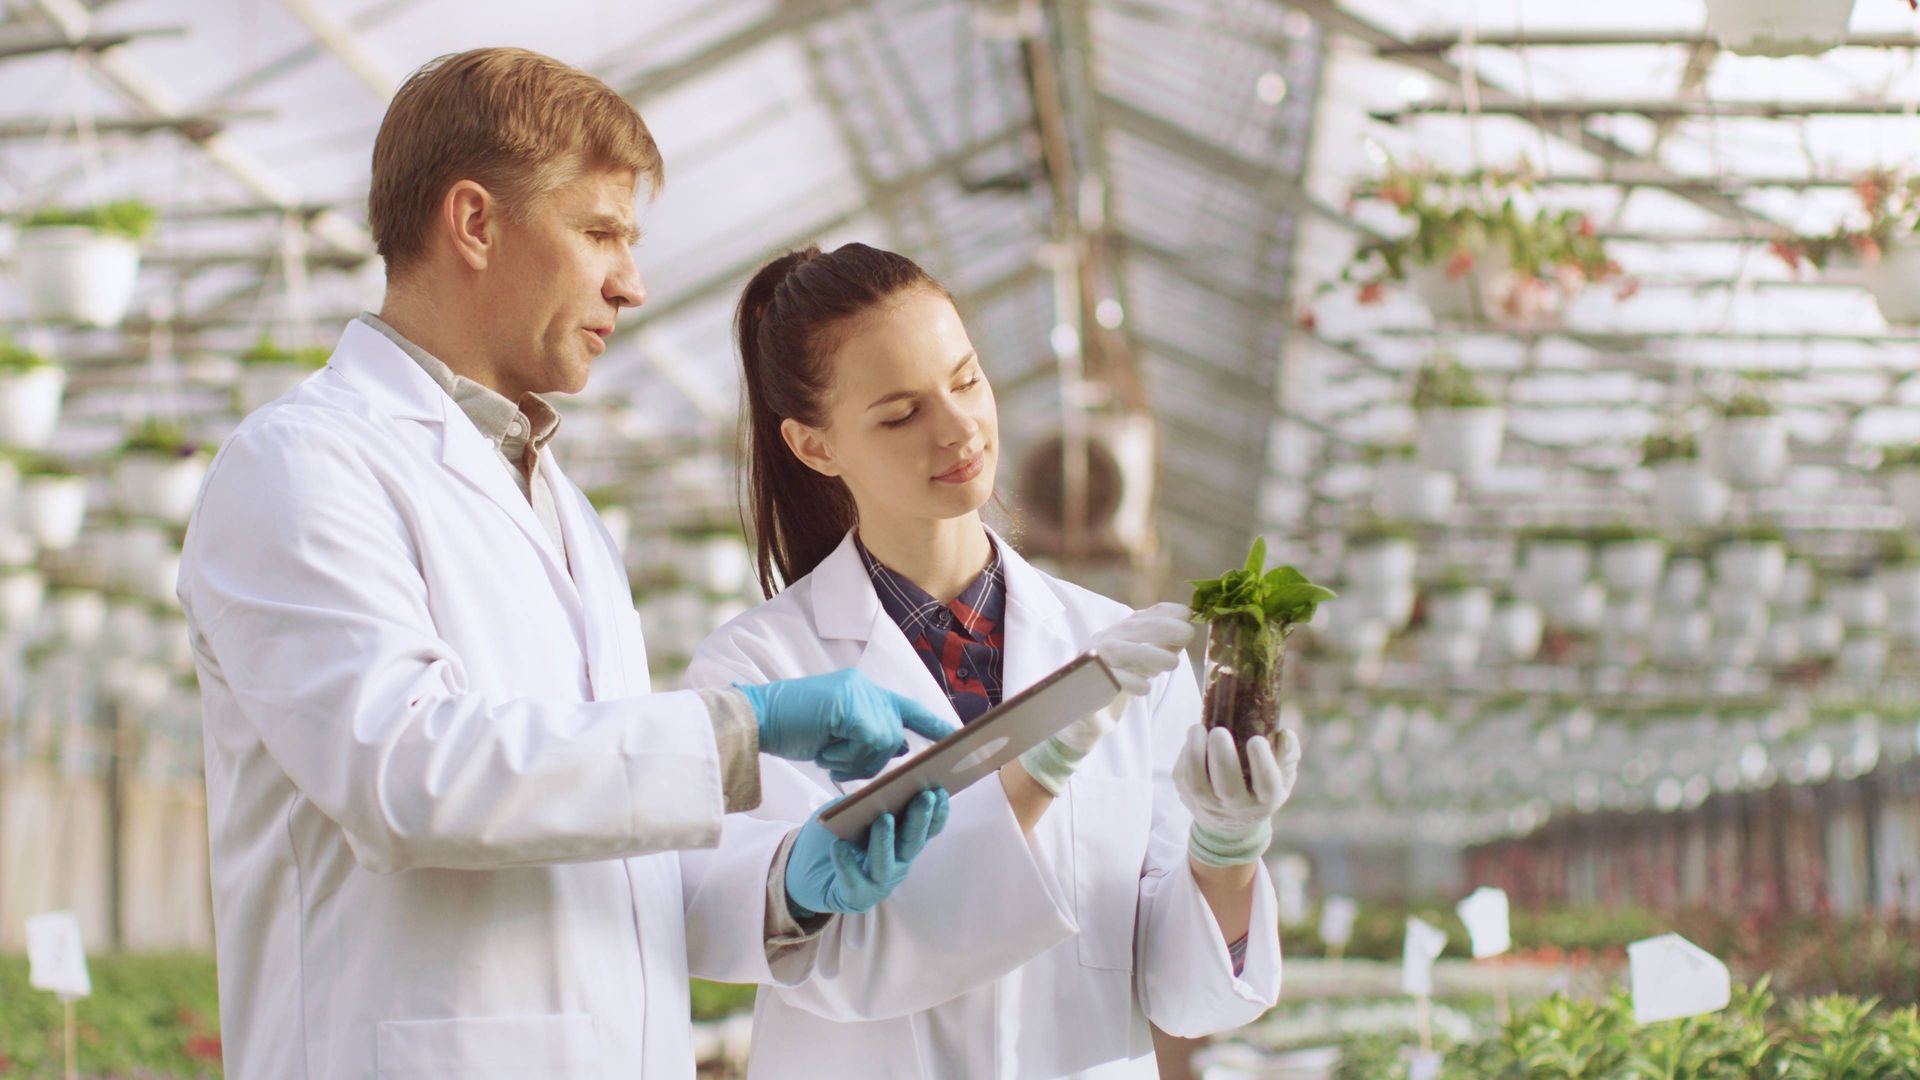 Image of technical expert analyzing plant health inside a floriculture greenhouse